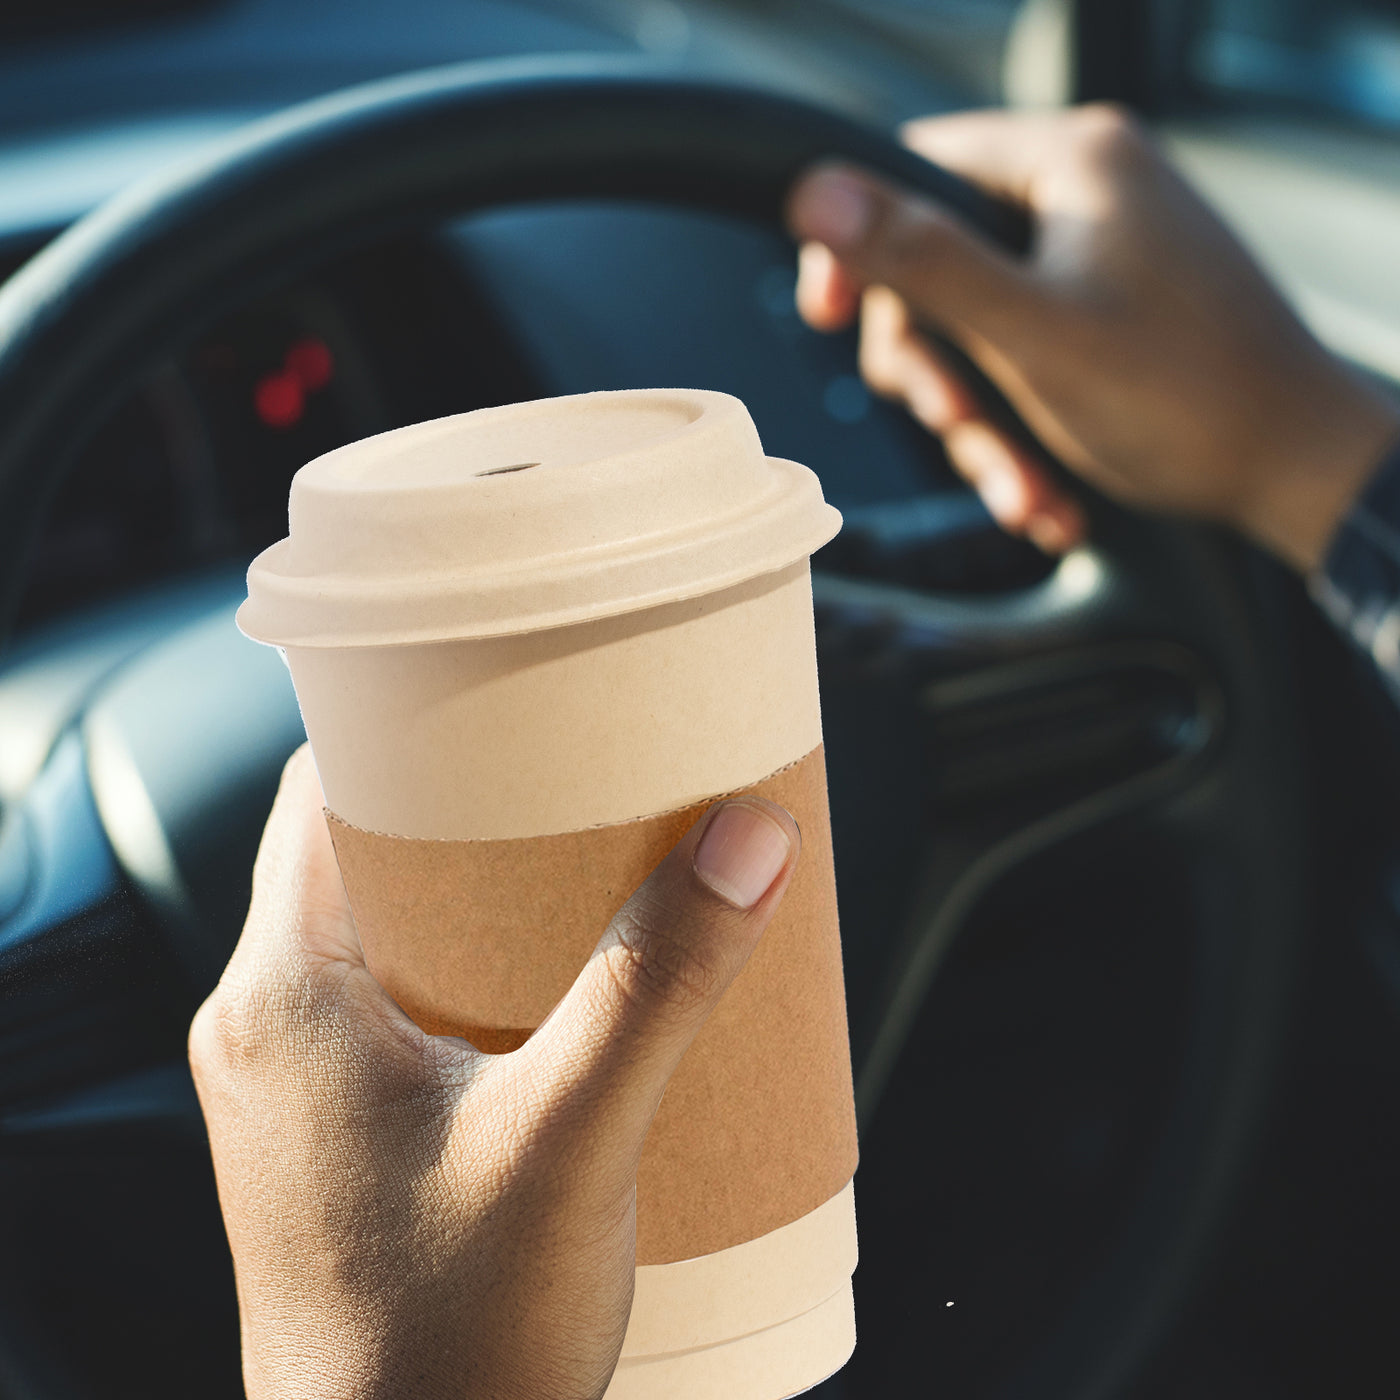 A person driving a car while holding a coffee cup. The cup is a 12oz disposable one with lids and sleeves.